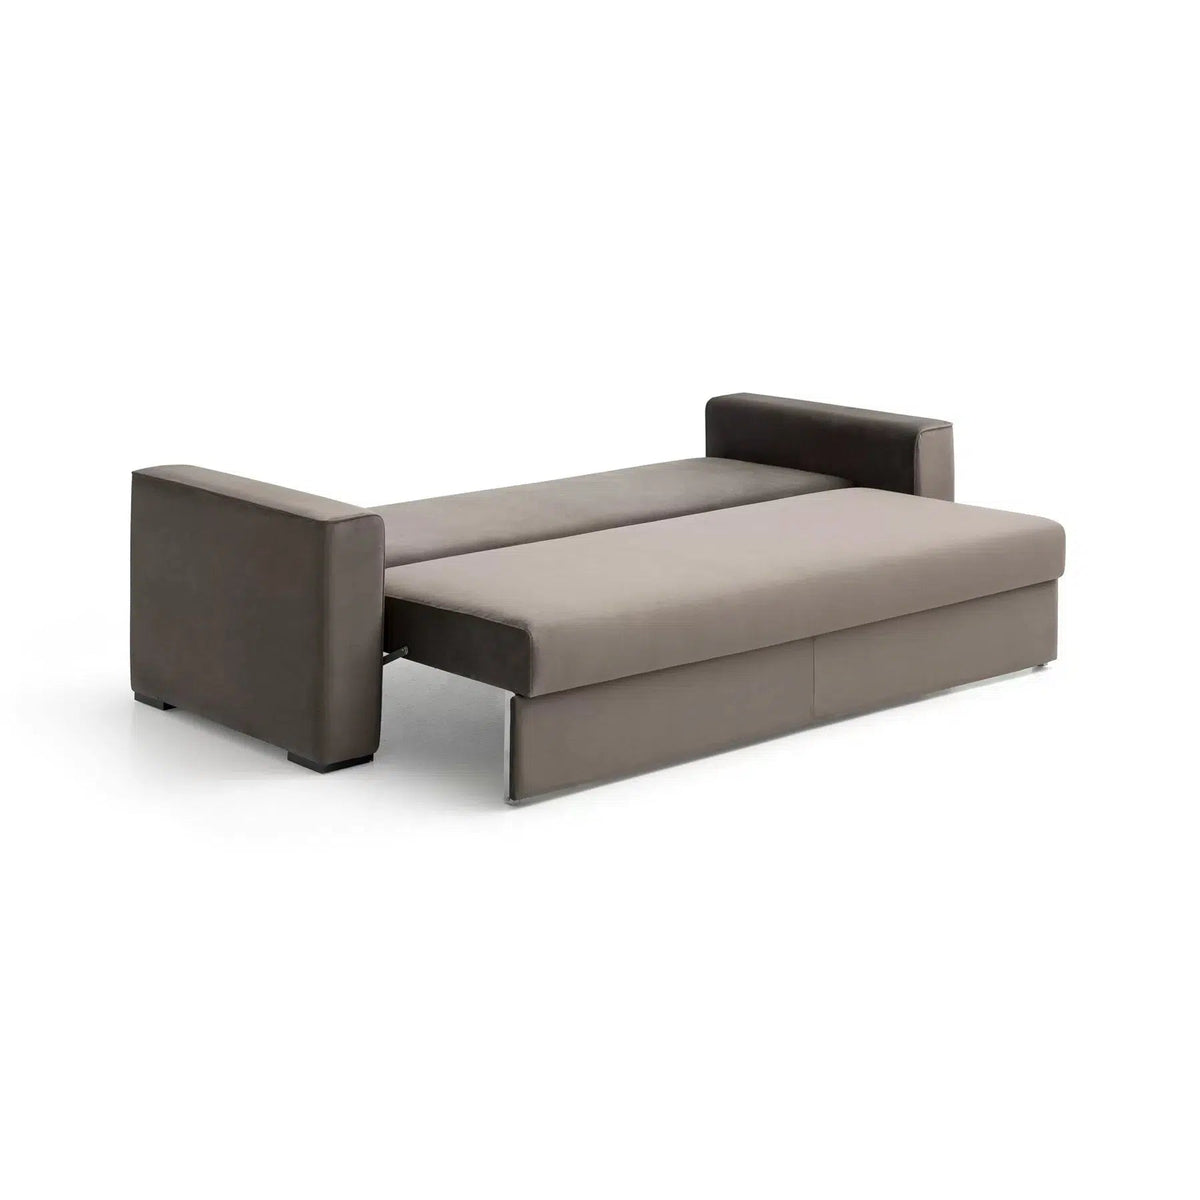 Limpo 935 Sofa Bed-TM Leader-Contract Furniture Store